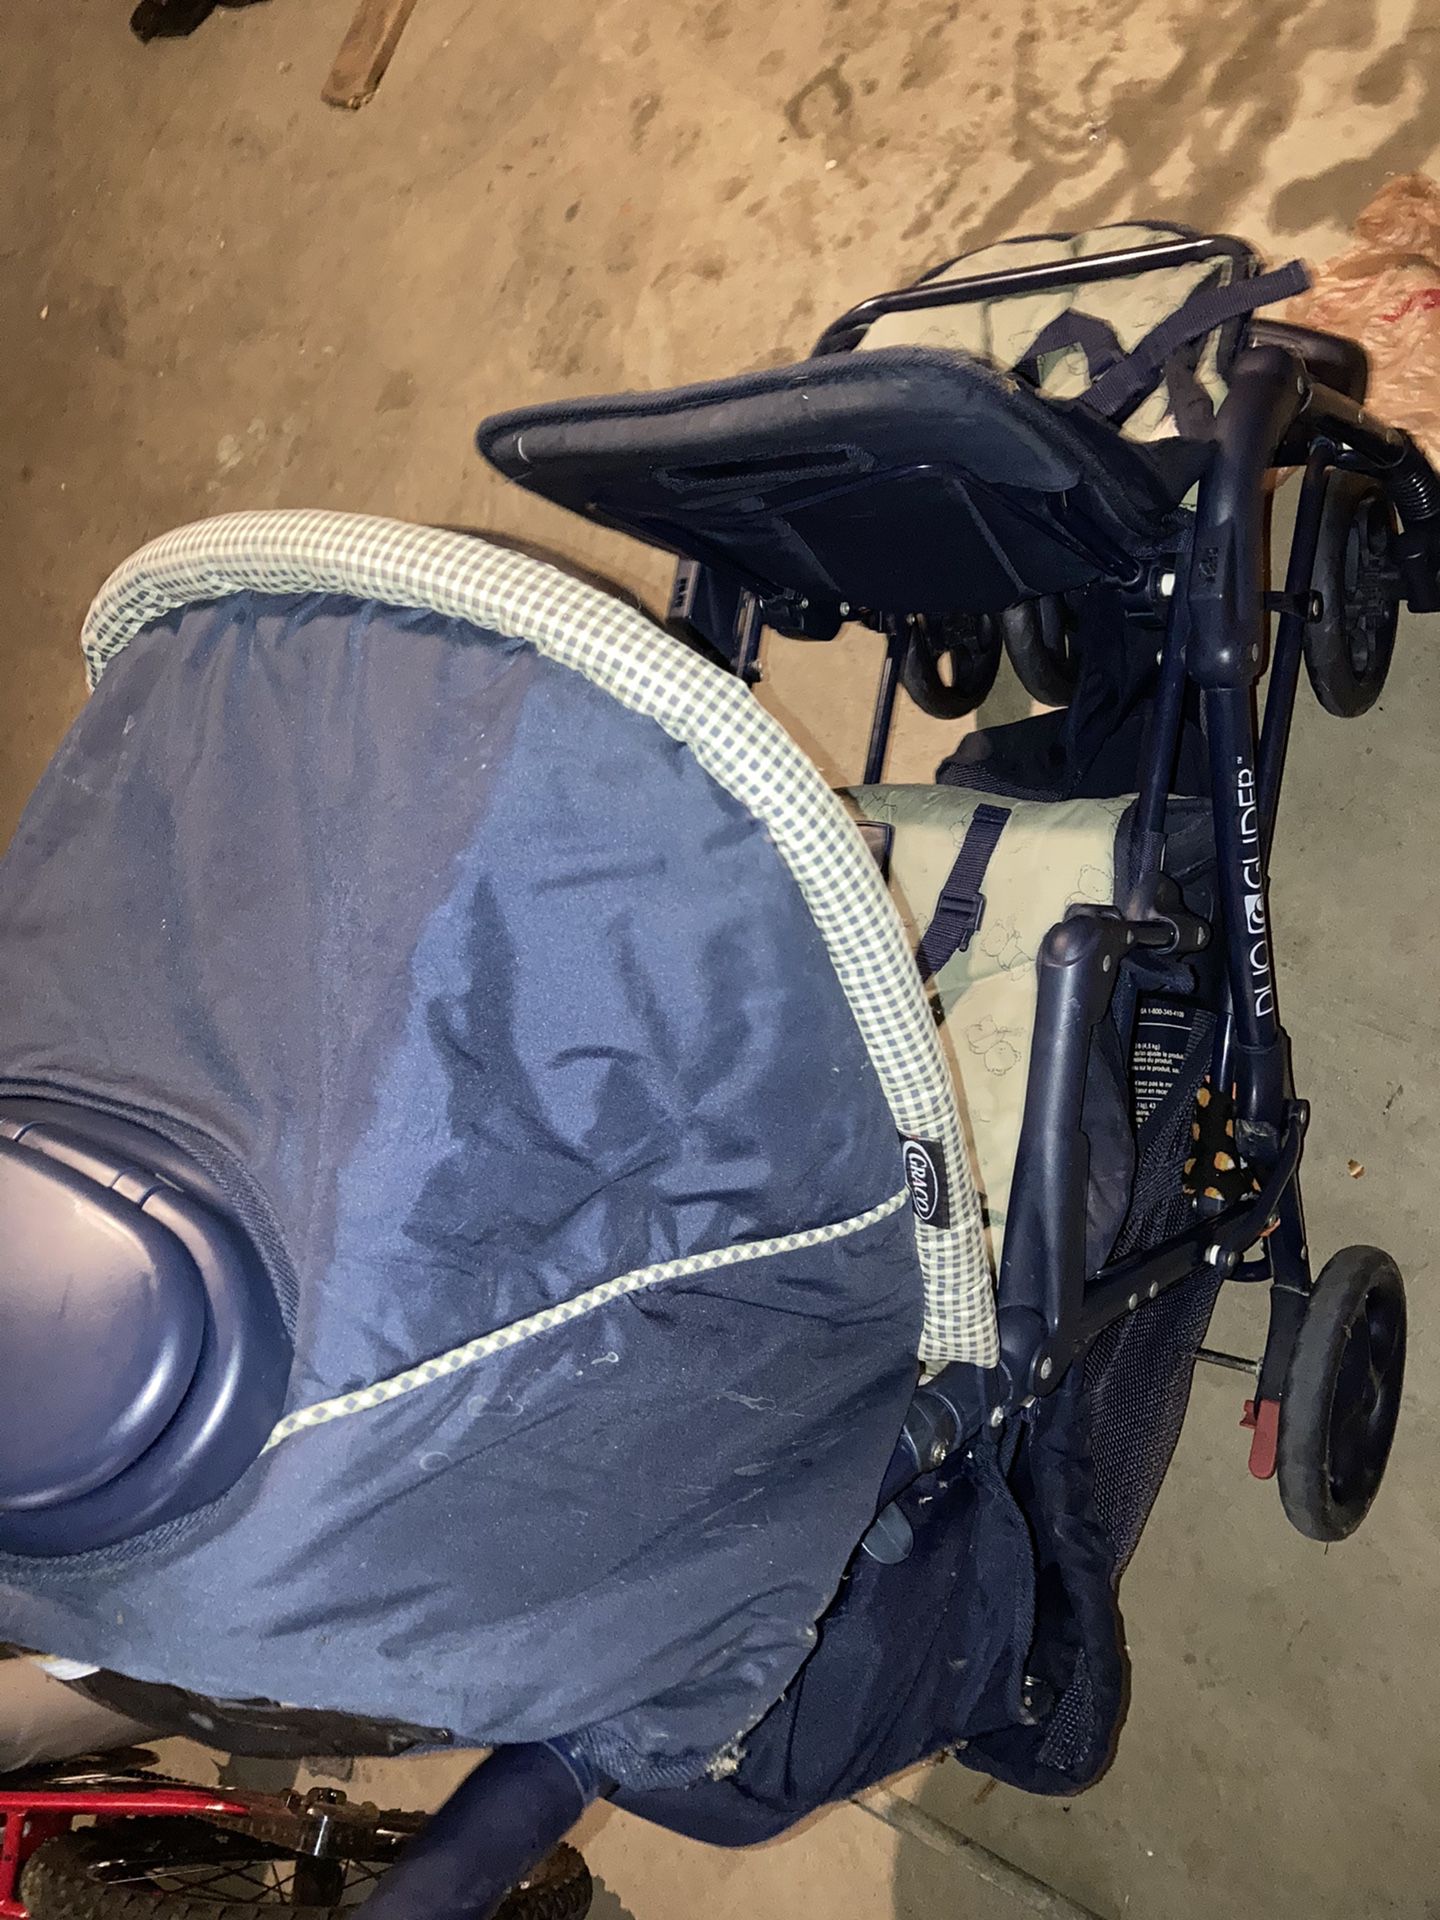 Double stroller for two kids